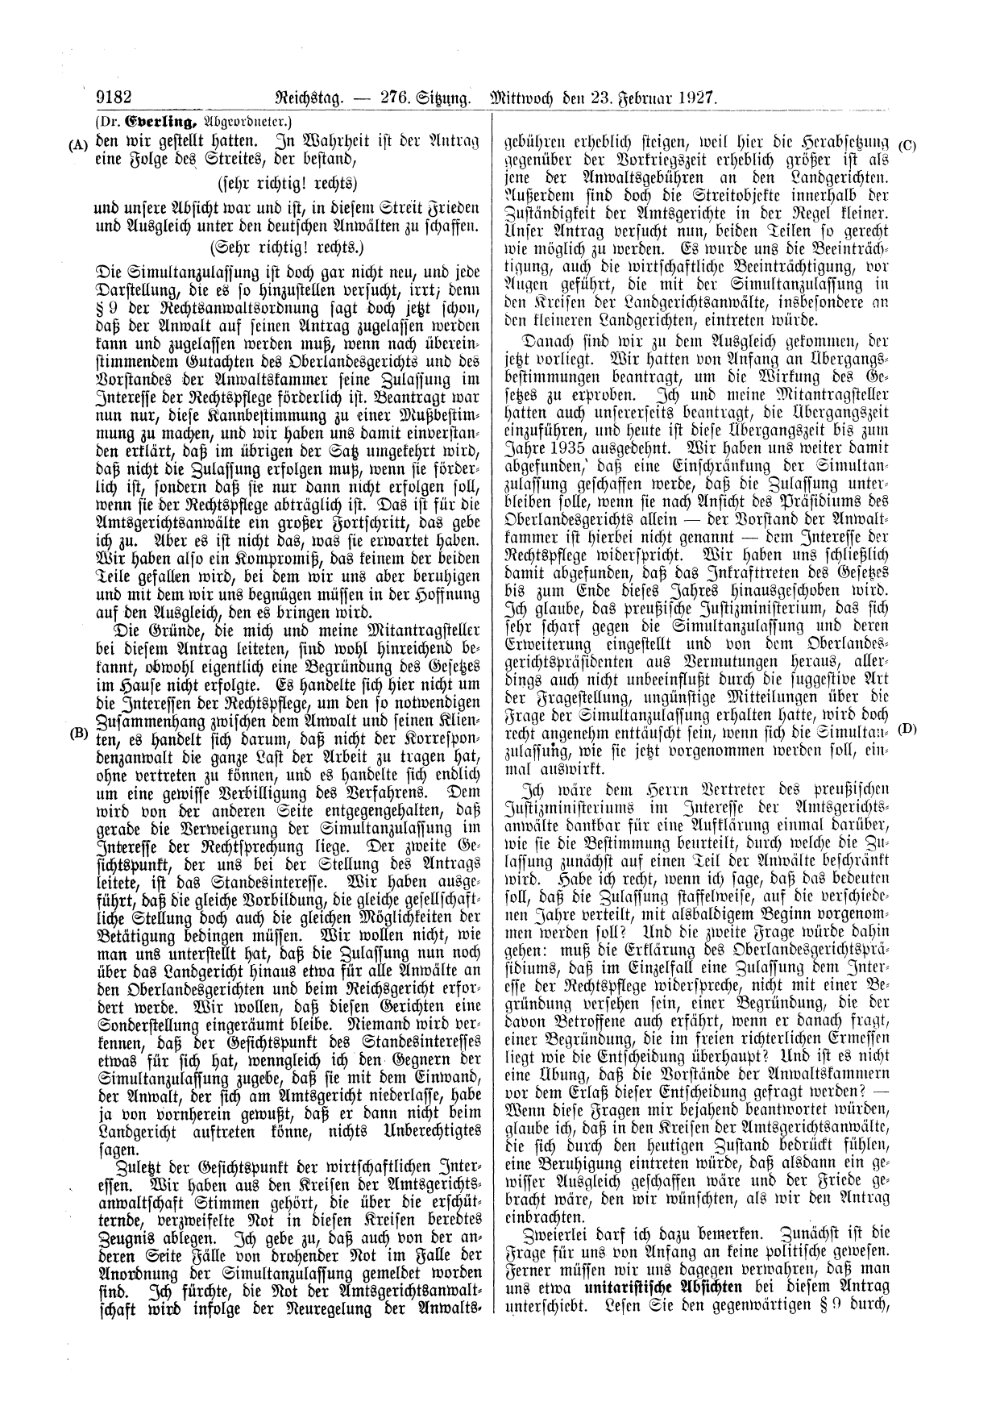 Scan of page 9182